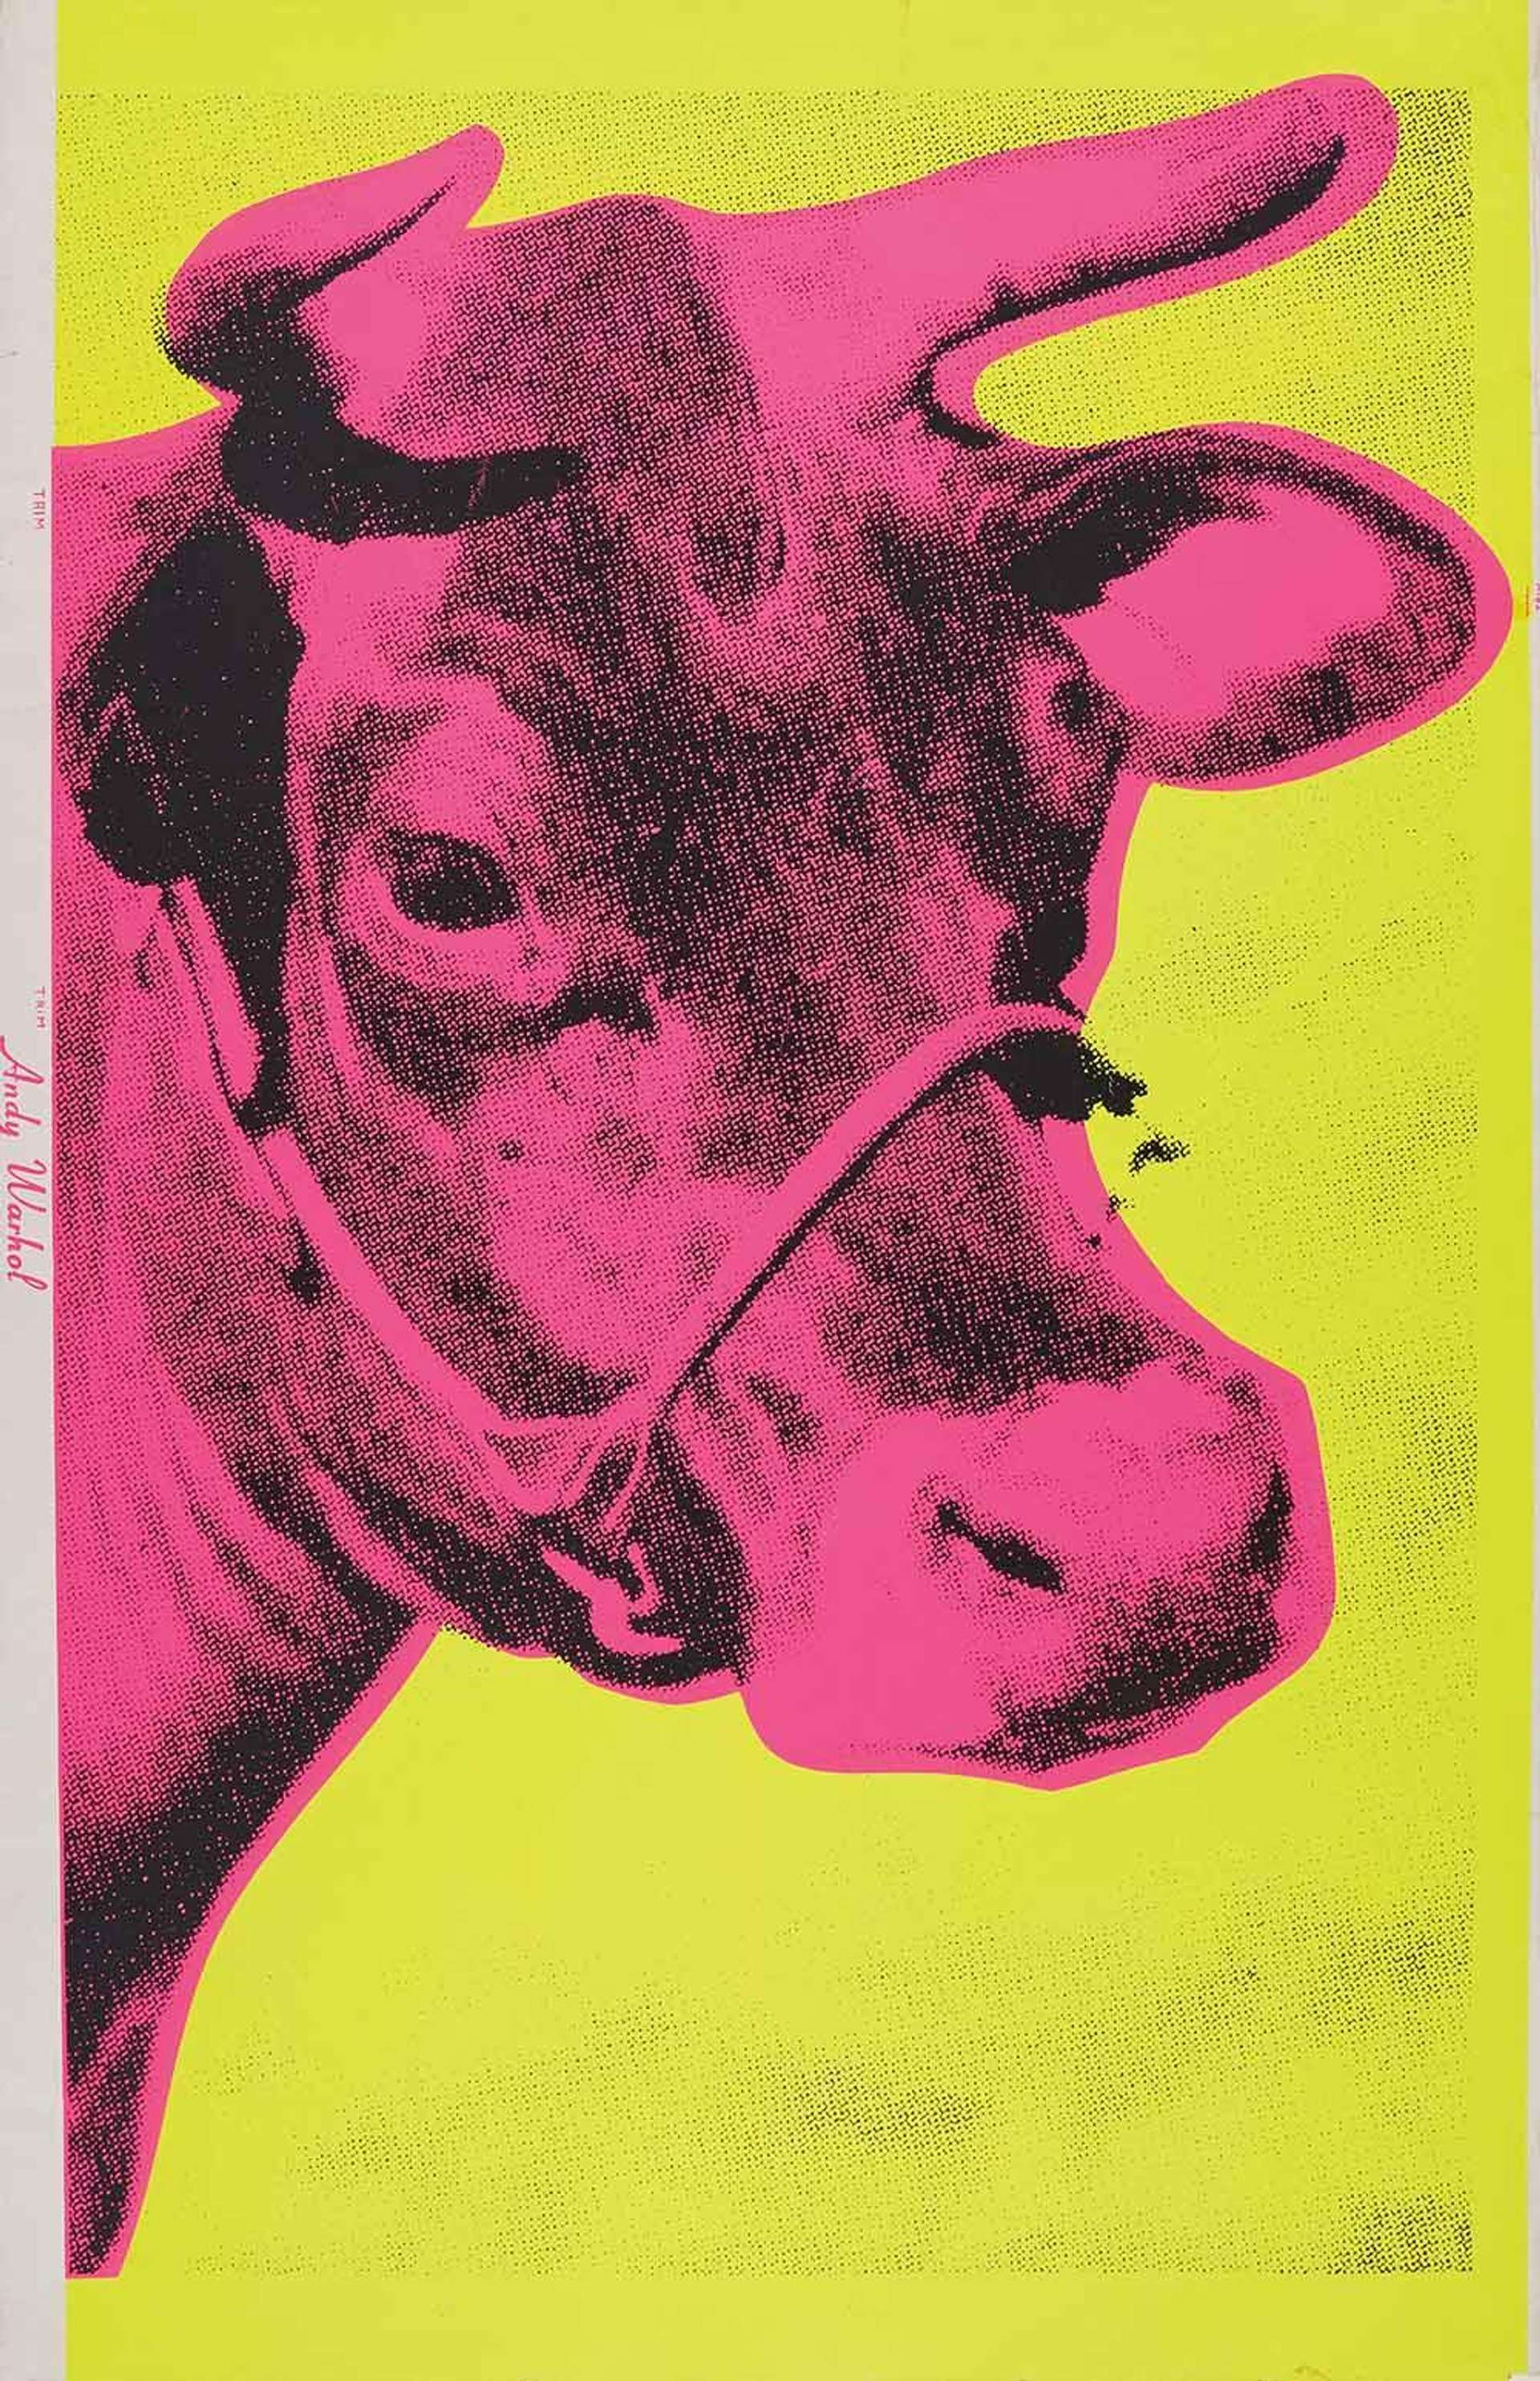 Cow (F. & S. II.11) by Andy Warhol